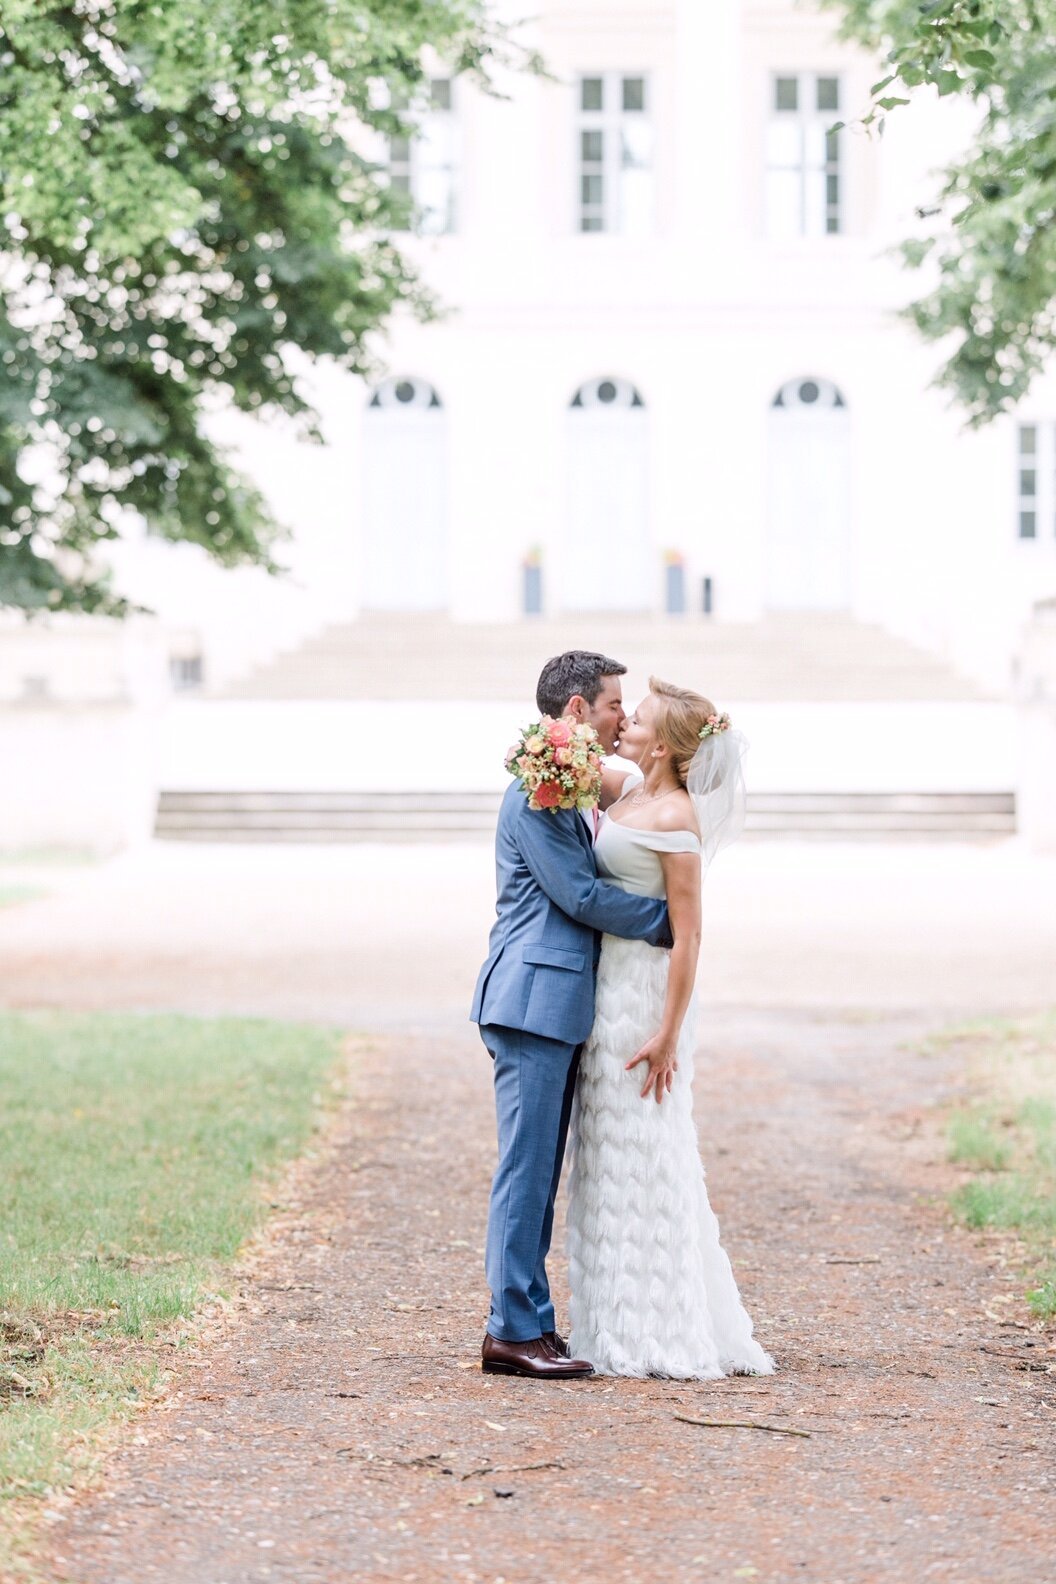 Beautiful bride Julia wears the Ivy skirt and Harbour top from Halfpenny London